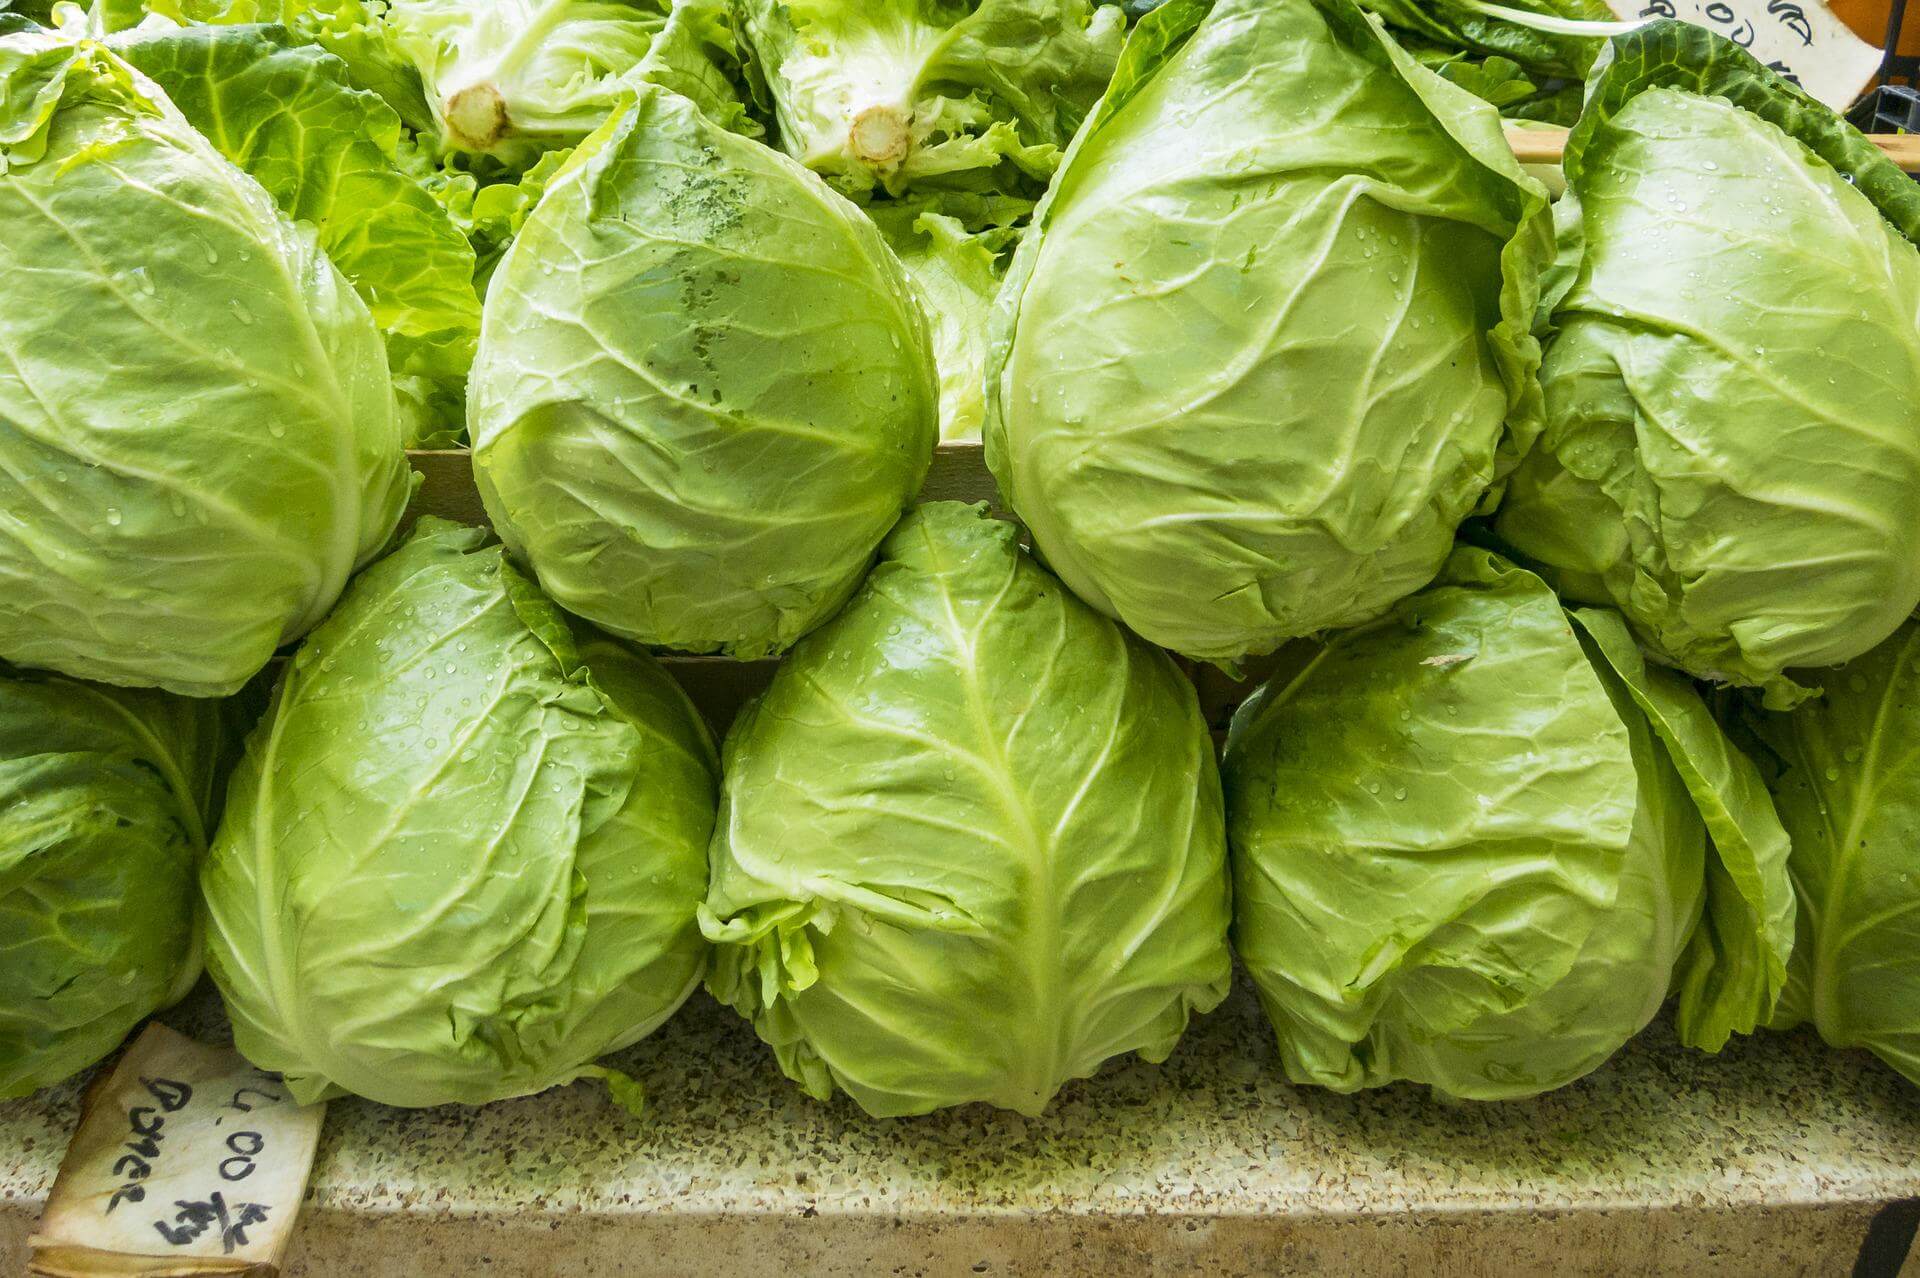 Grow fresh cabbage heads for greens anytime